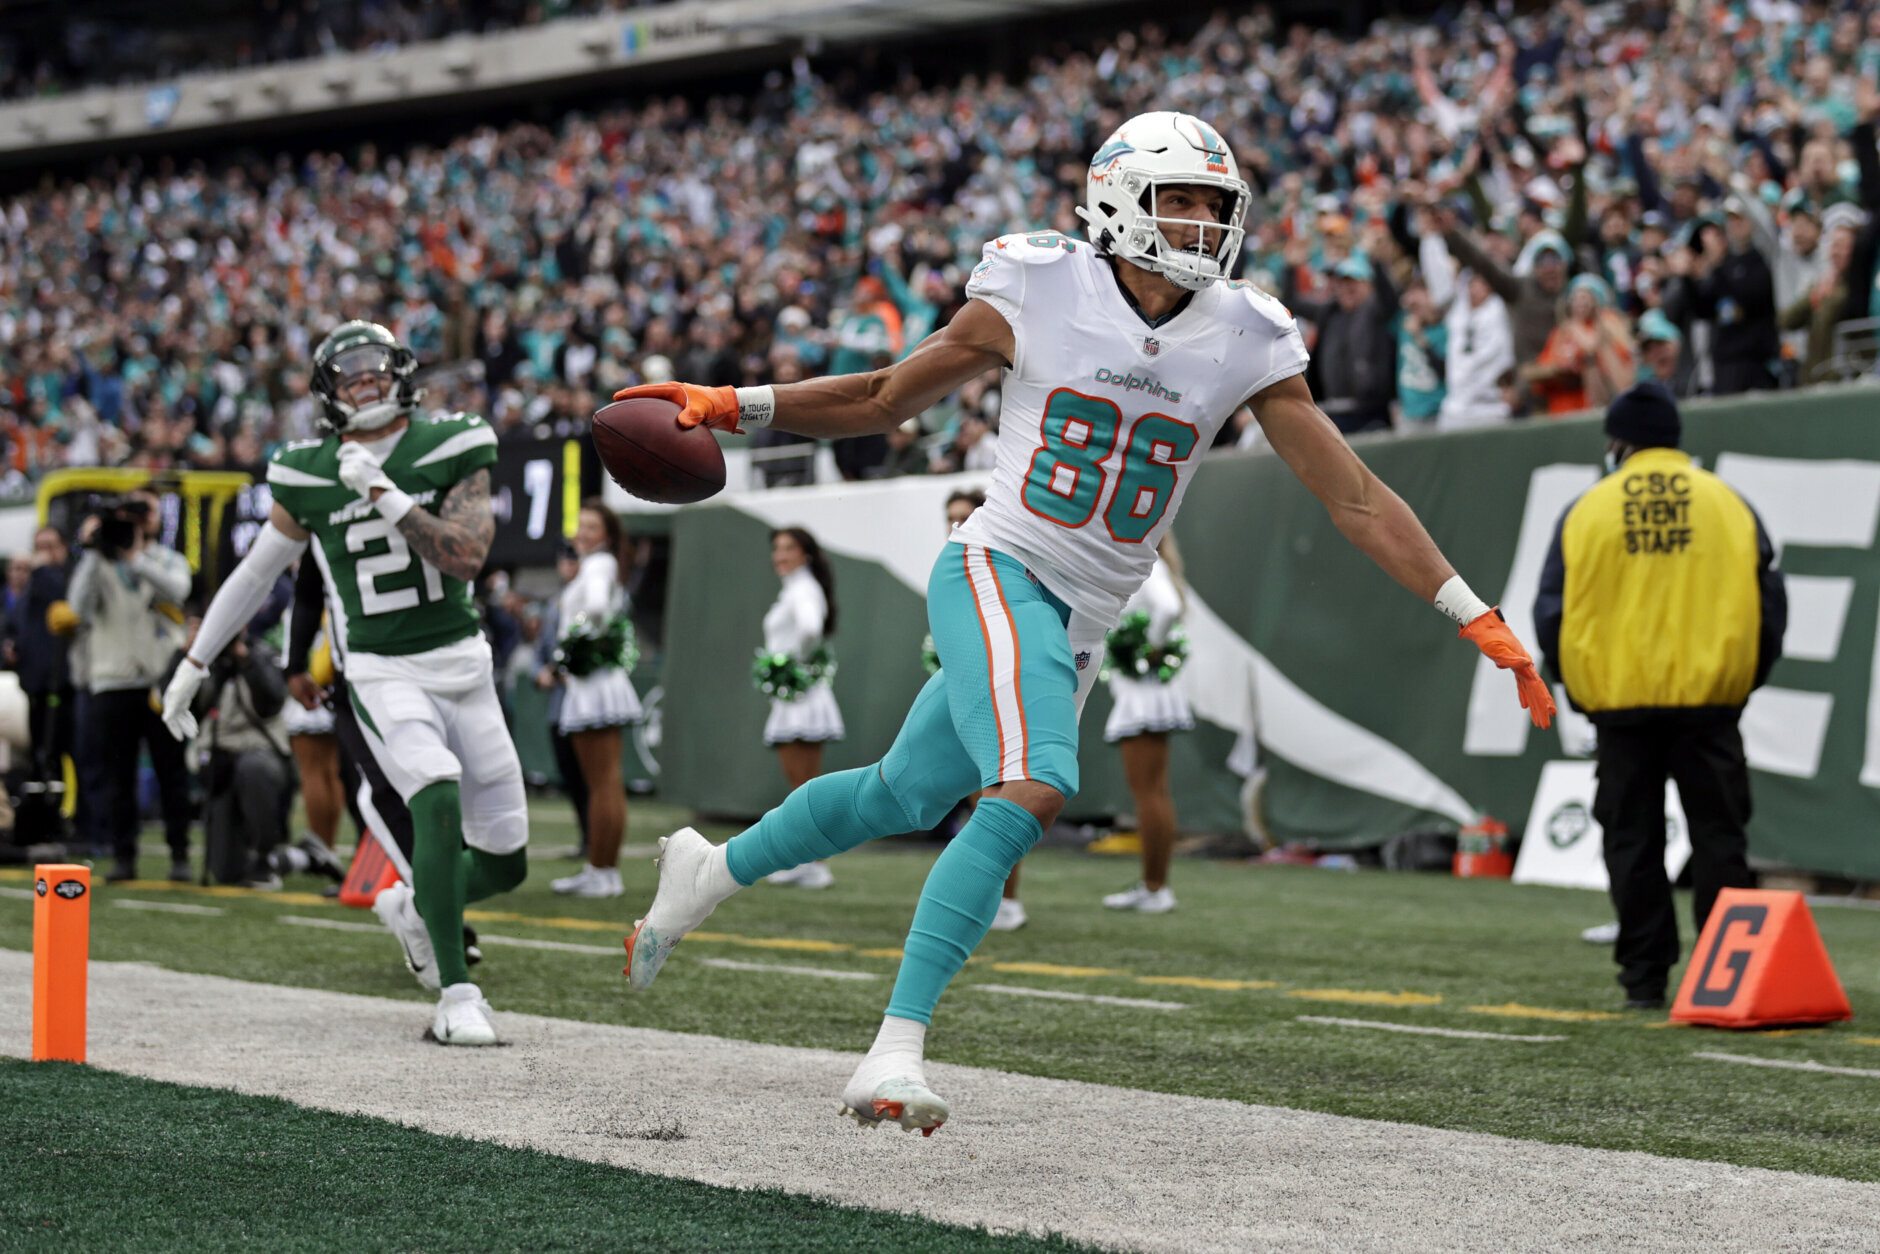 <p><em><strong>Dolphins 24</strong></em><br />
<em><strong>Jets 17</strong></em></p>
<p>Is it me, or is New York&#8217;s offense at its best when literally anyone not named Zach Wilson starts?</p>
<p>This may also be just me but Miami&#8217;s third straight win feels like it&#8217;s setting the Fins up for a compelling December stretch.</p>
